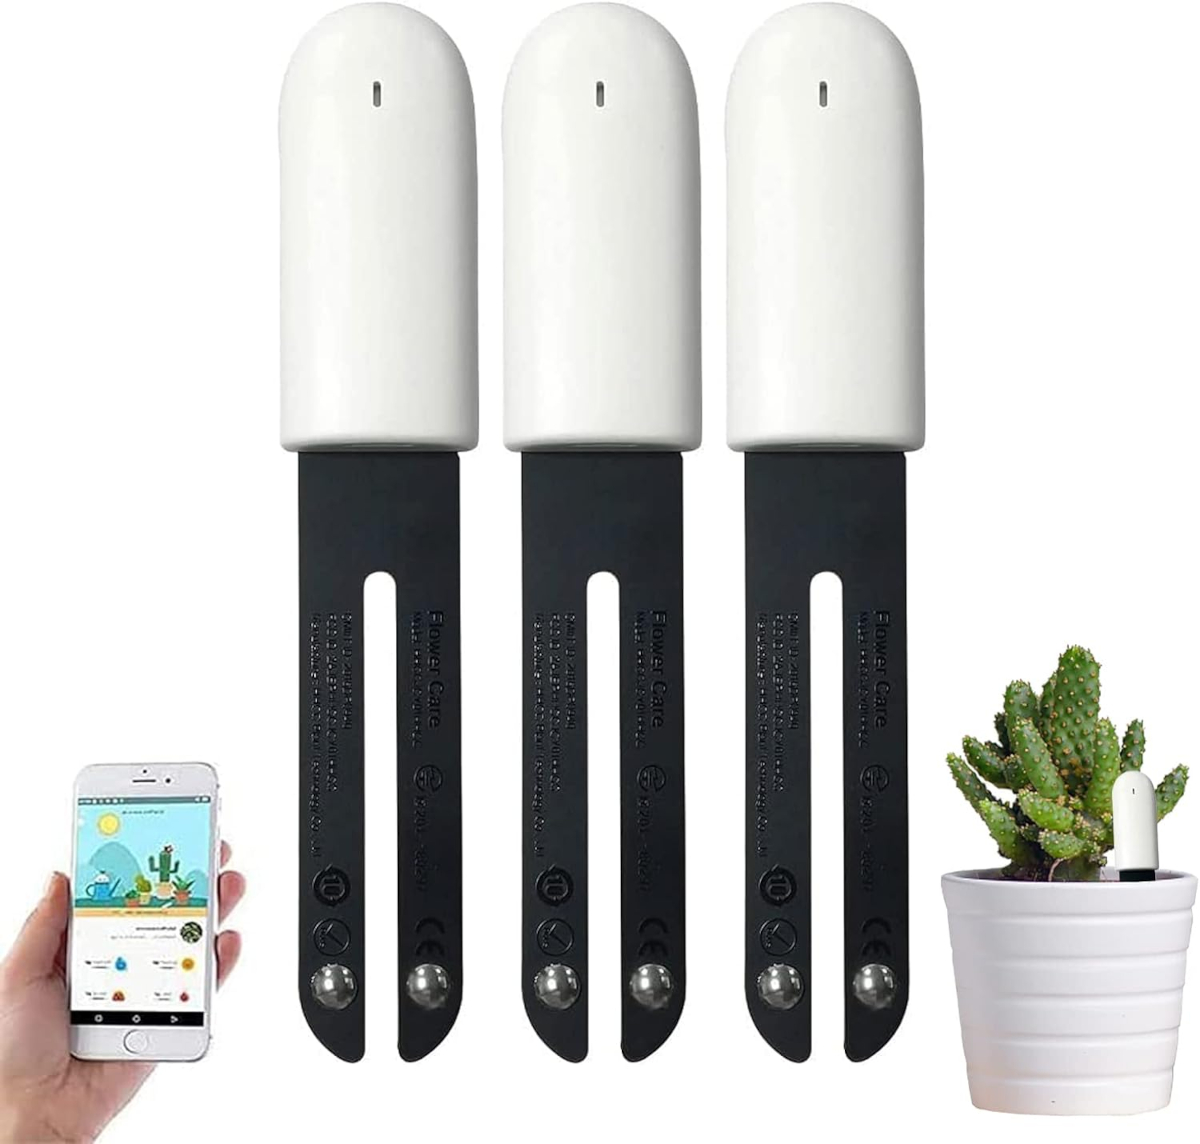 A product photo collage of three Sinbeda garden moisture meters, an accompanying smartphone app, and a small houseplant.